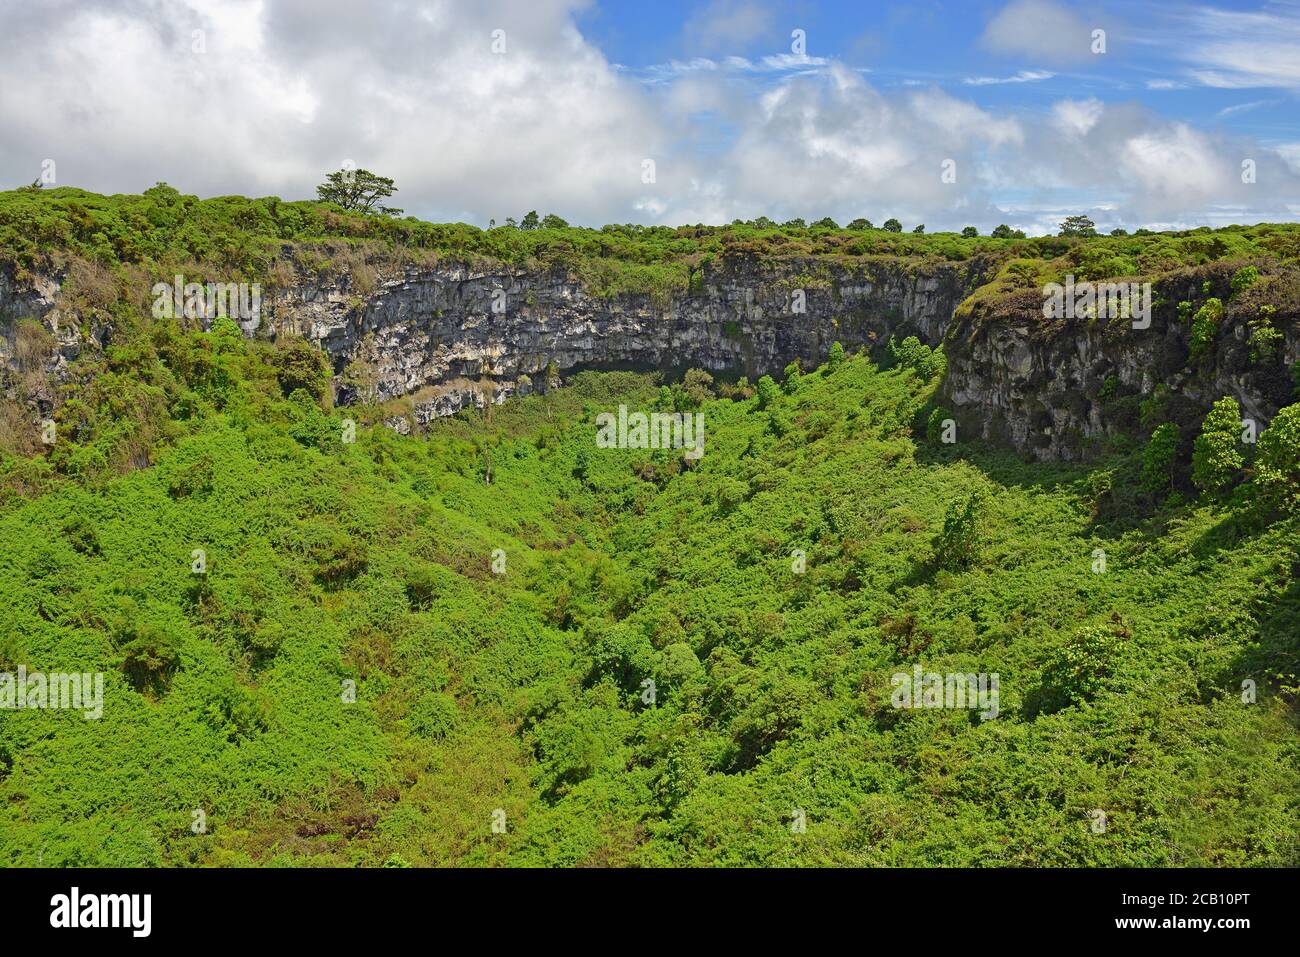 One of two extinct volcanic craters of 'Los Gemelos' or twins with lush vegetation, Santa Cruz island, Galapagos islands national park, Ecuador. Stock Photo